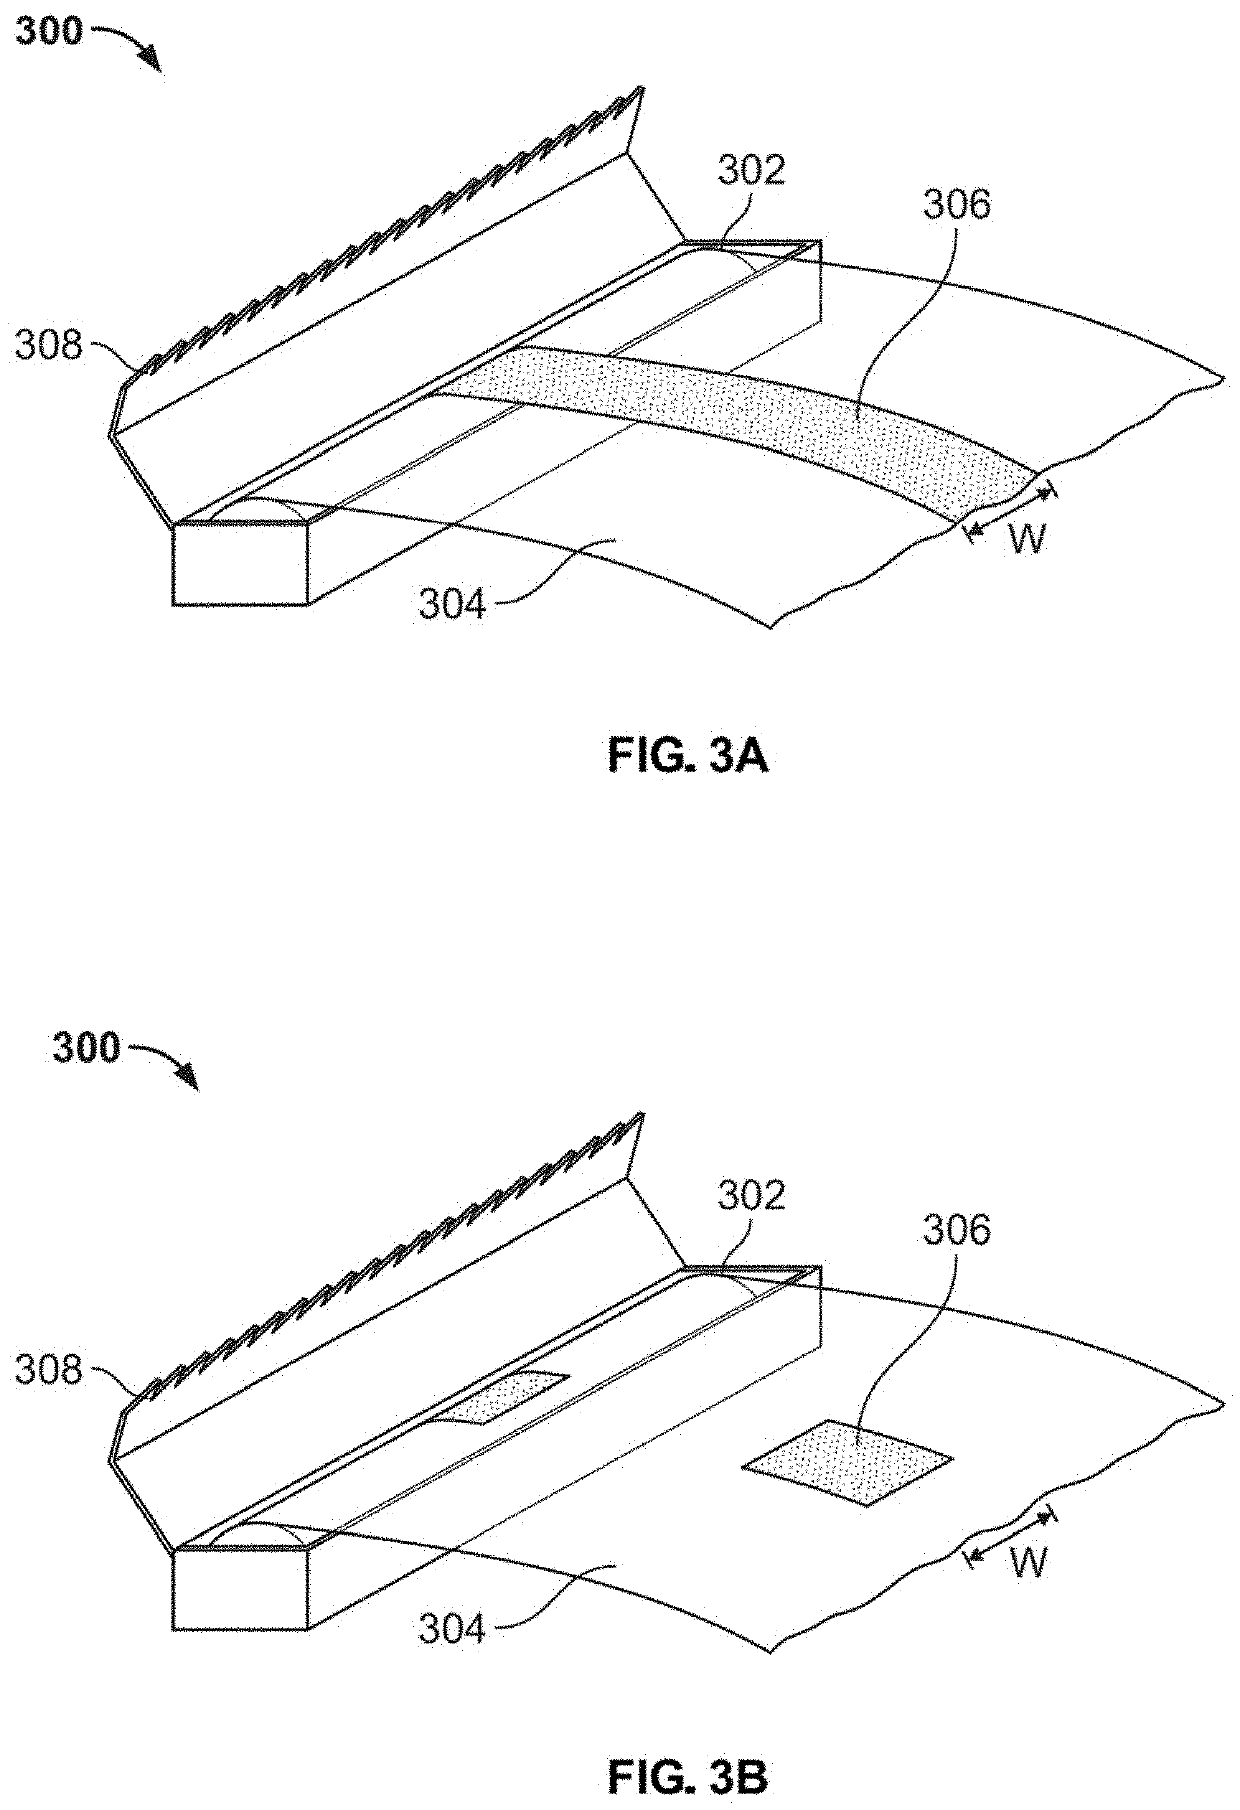 Personal protective equipment and methods for preventing spread of infectious disease